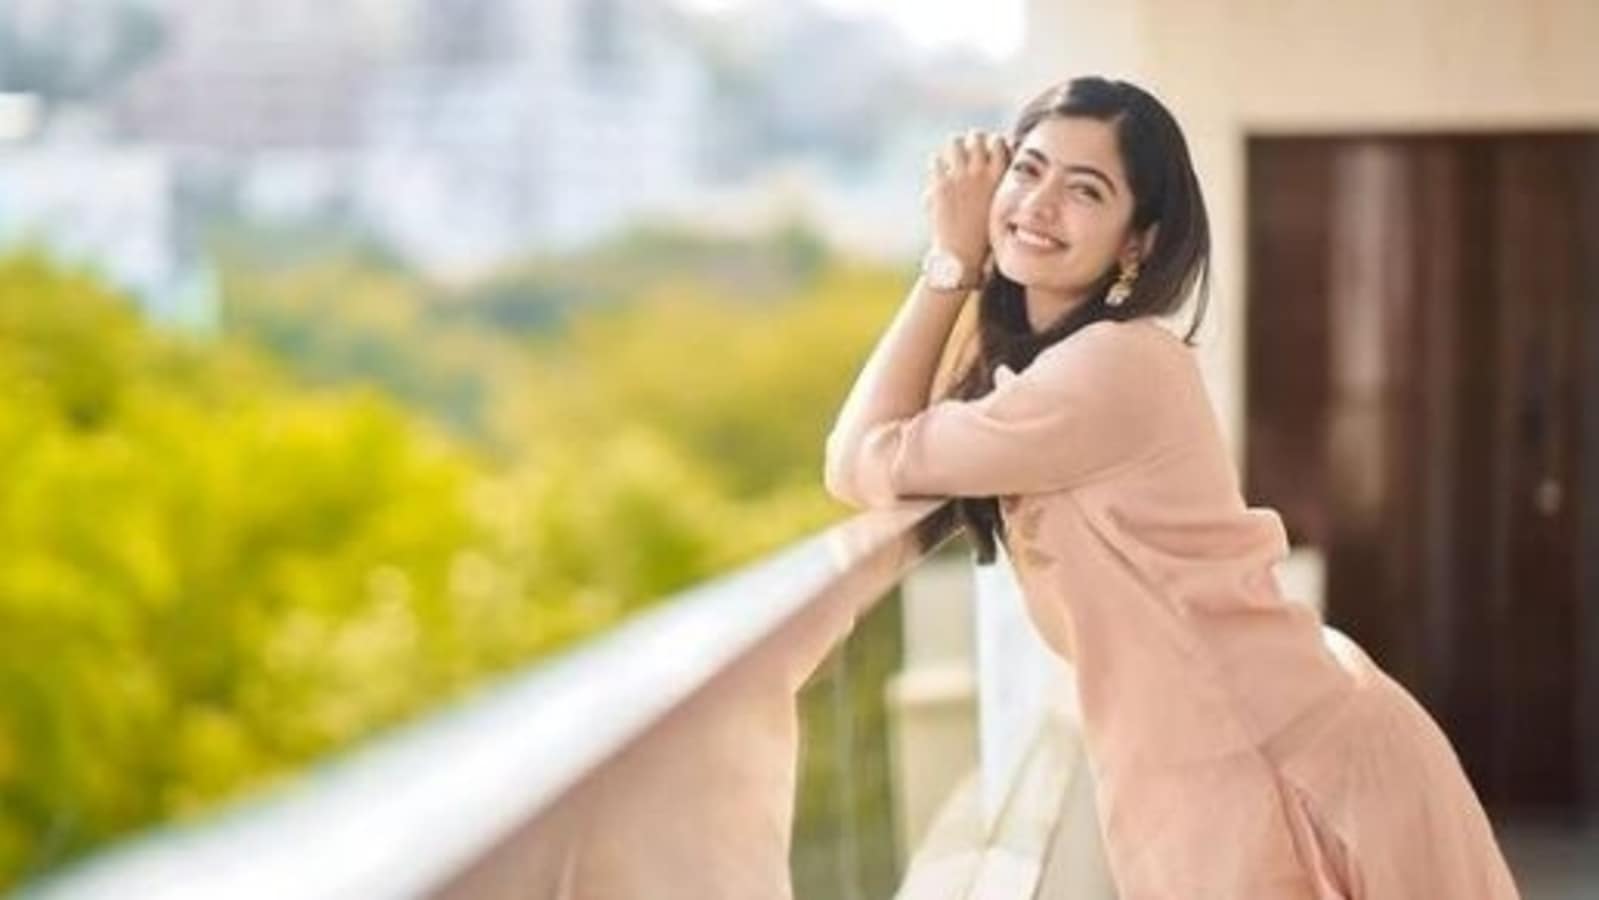 Rashmika Mandanna says 'Mission Majnu has given me so many firsts': 'I couldn't have asked for more' | Bollywood - Hindustan Times